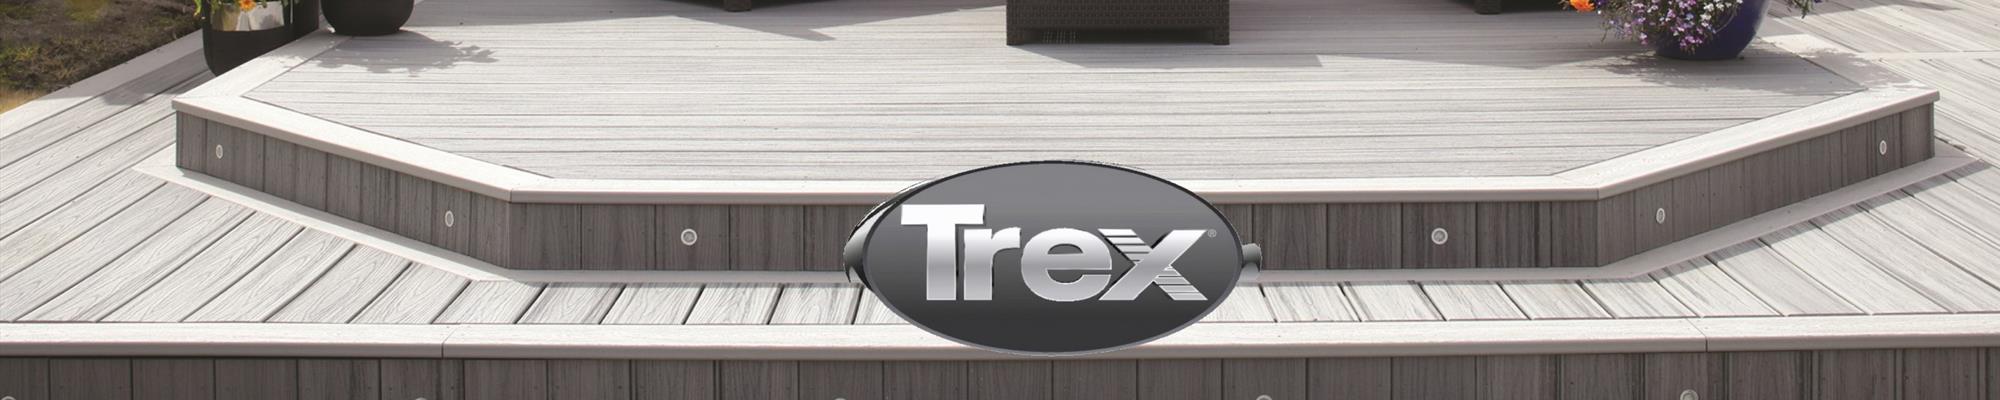 Image of Trex composite decking stocked at our busy yard in Membury, Lambourn Woodlands. 